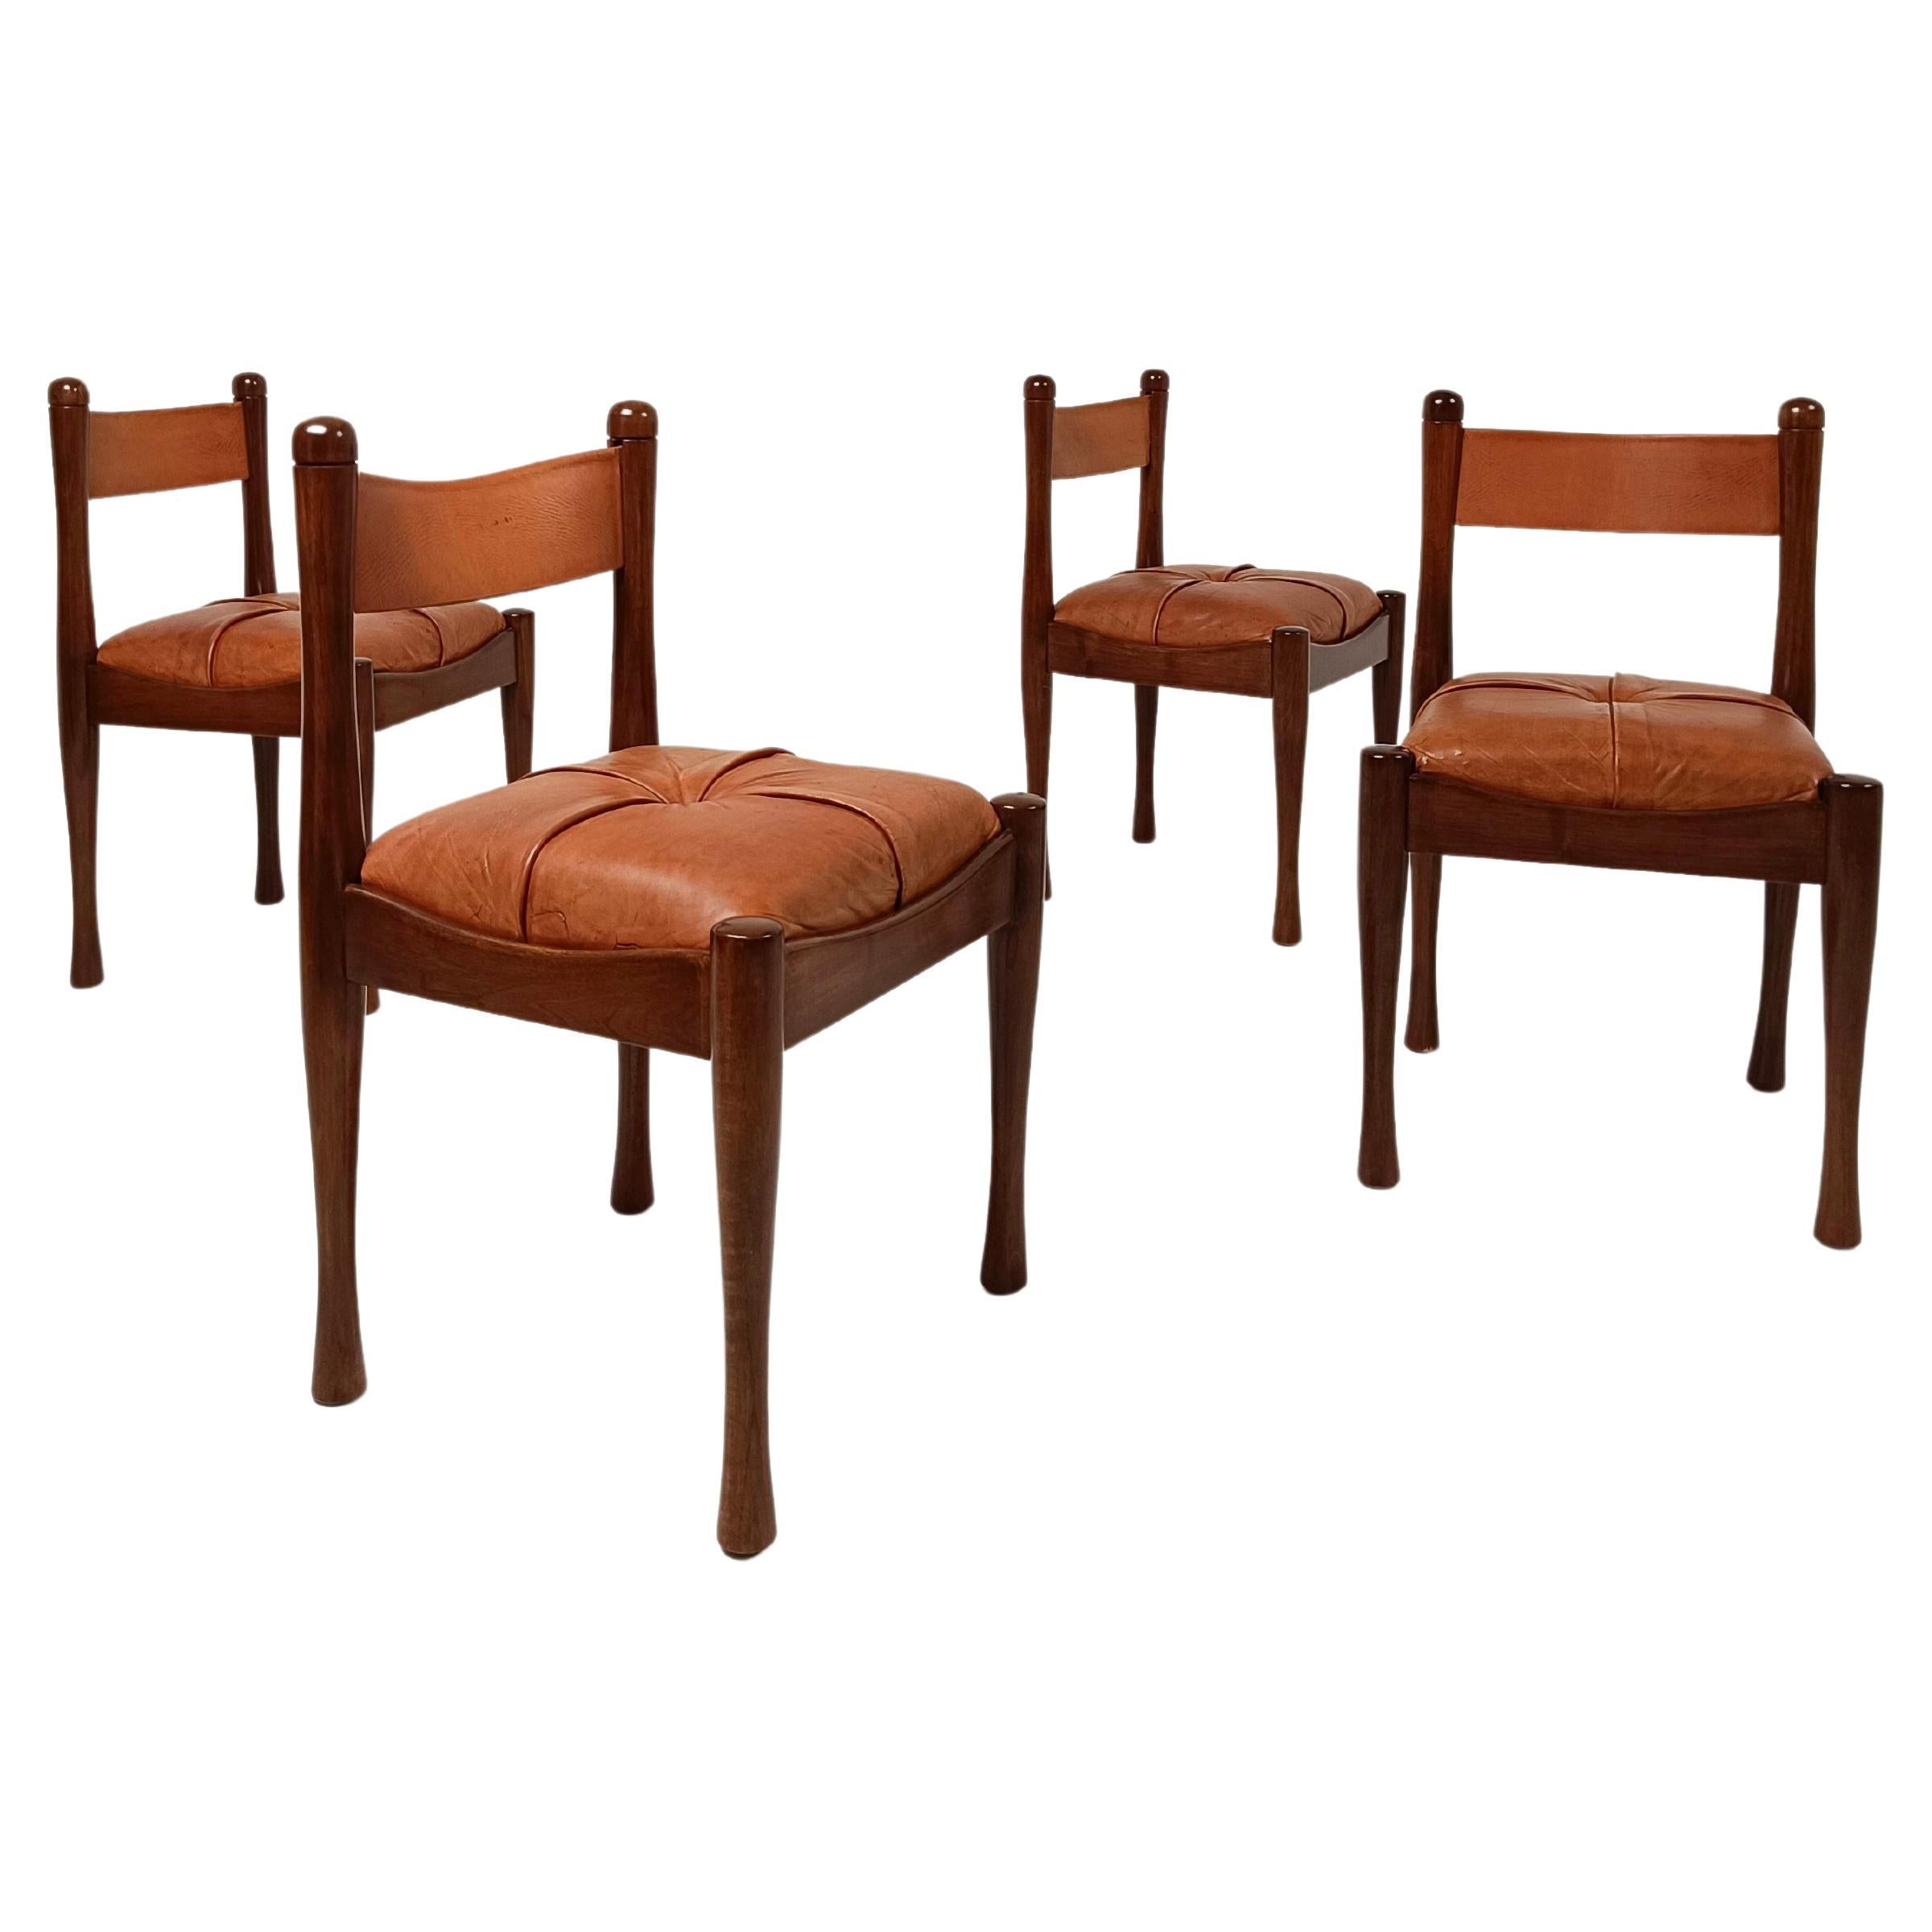 A set of 4 Italian Chairs in Wood and Cognac Leather by S. Coppola for Bernini  For Sale